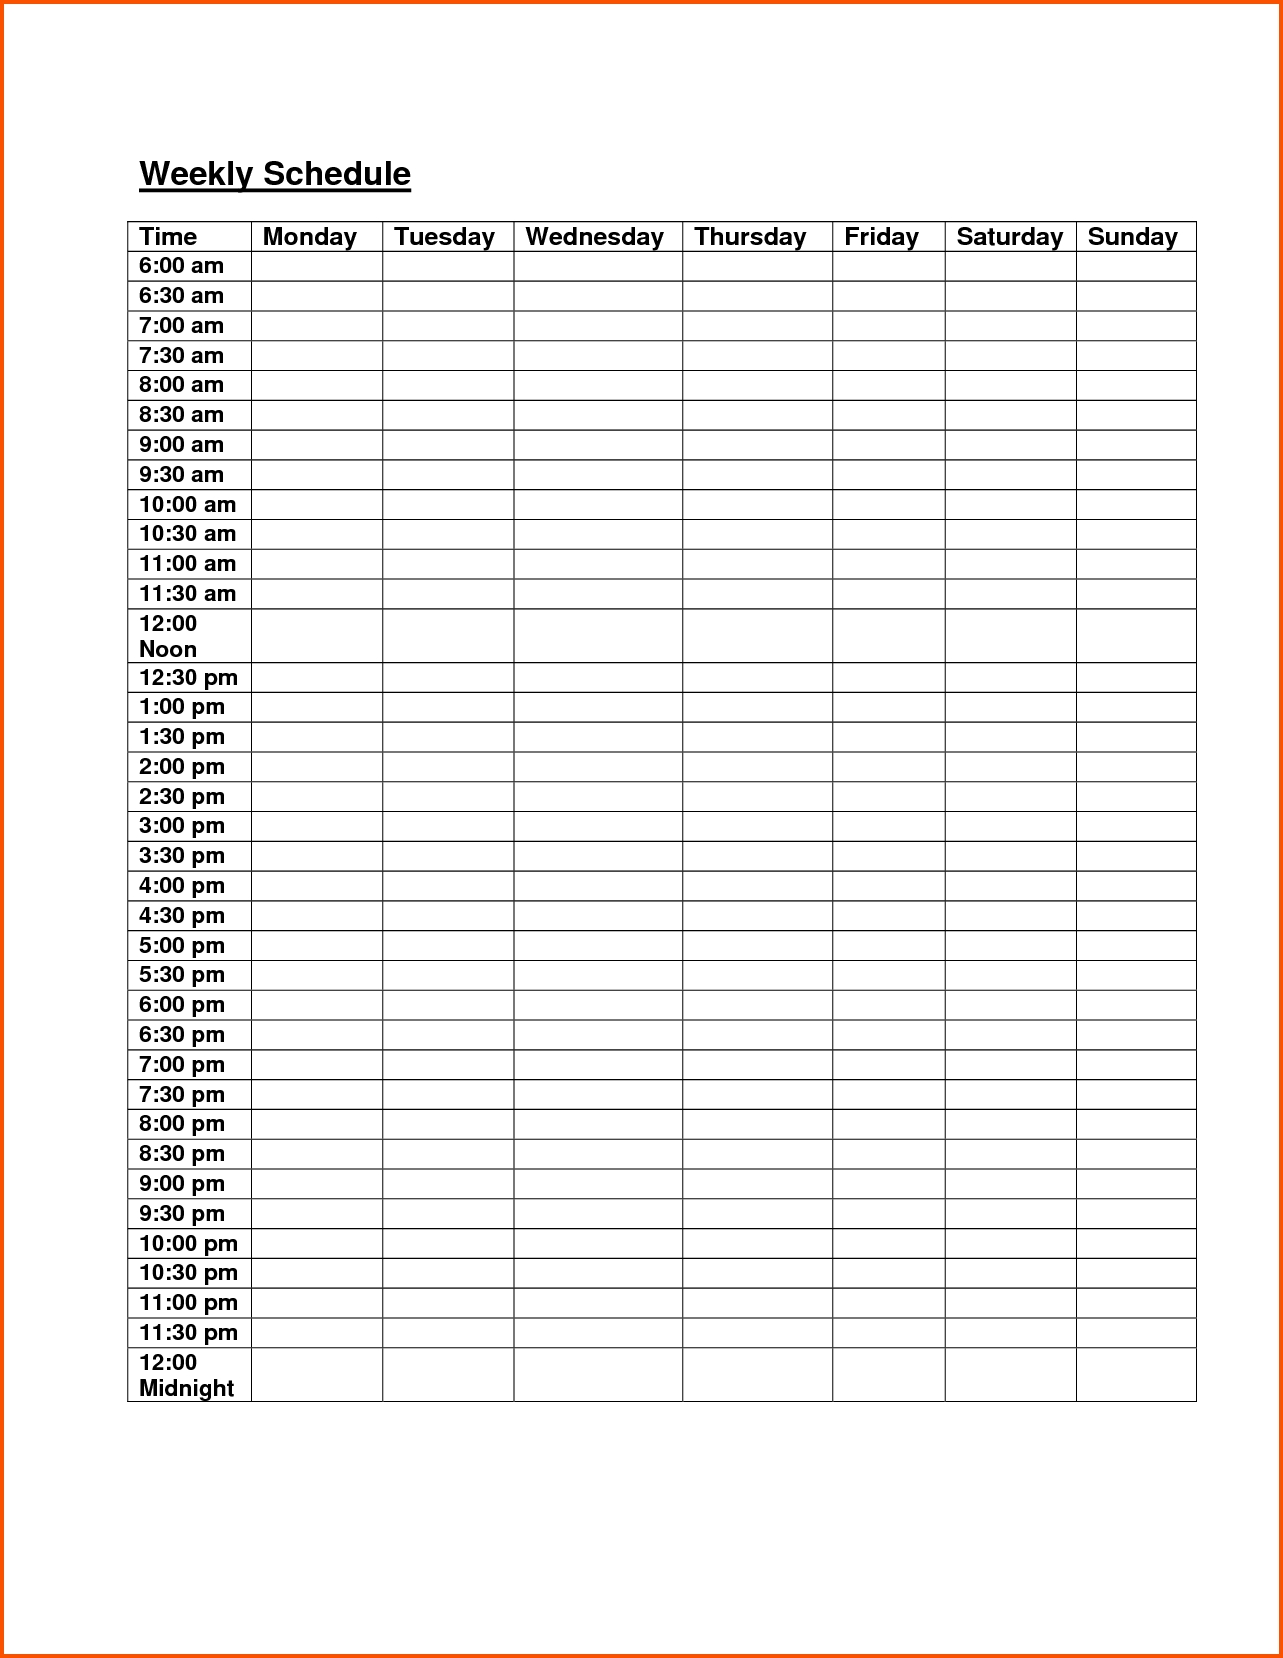 Free Weekly Class Schedule Template Excel #1 | Those Who Can, Teach regarding Free Weekly Calendar Templates Printable